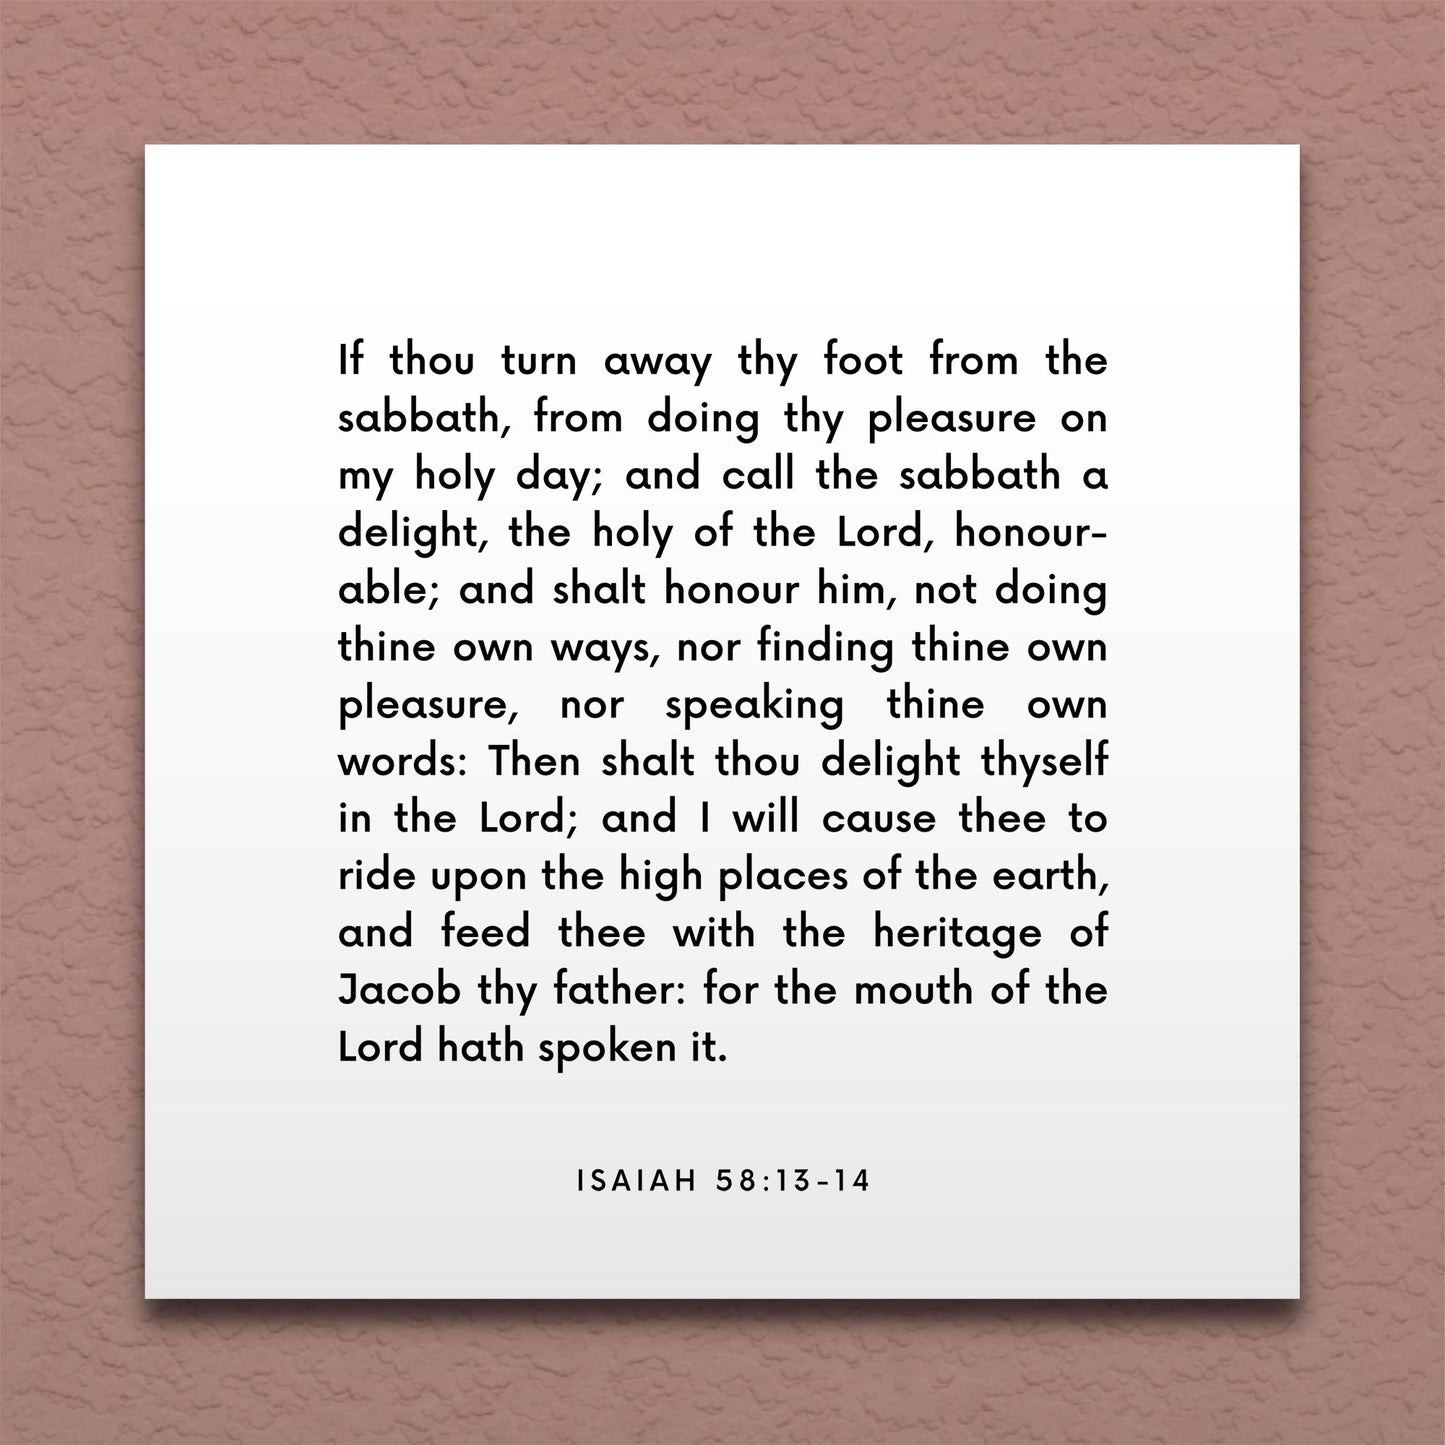 Wall-mounted scripture tile for Isaiah 58:13-14 - "Call the sabbath a delight"